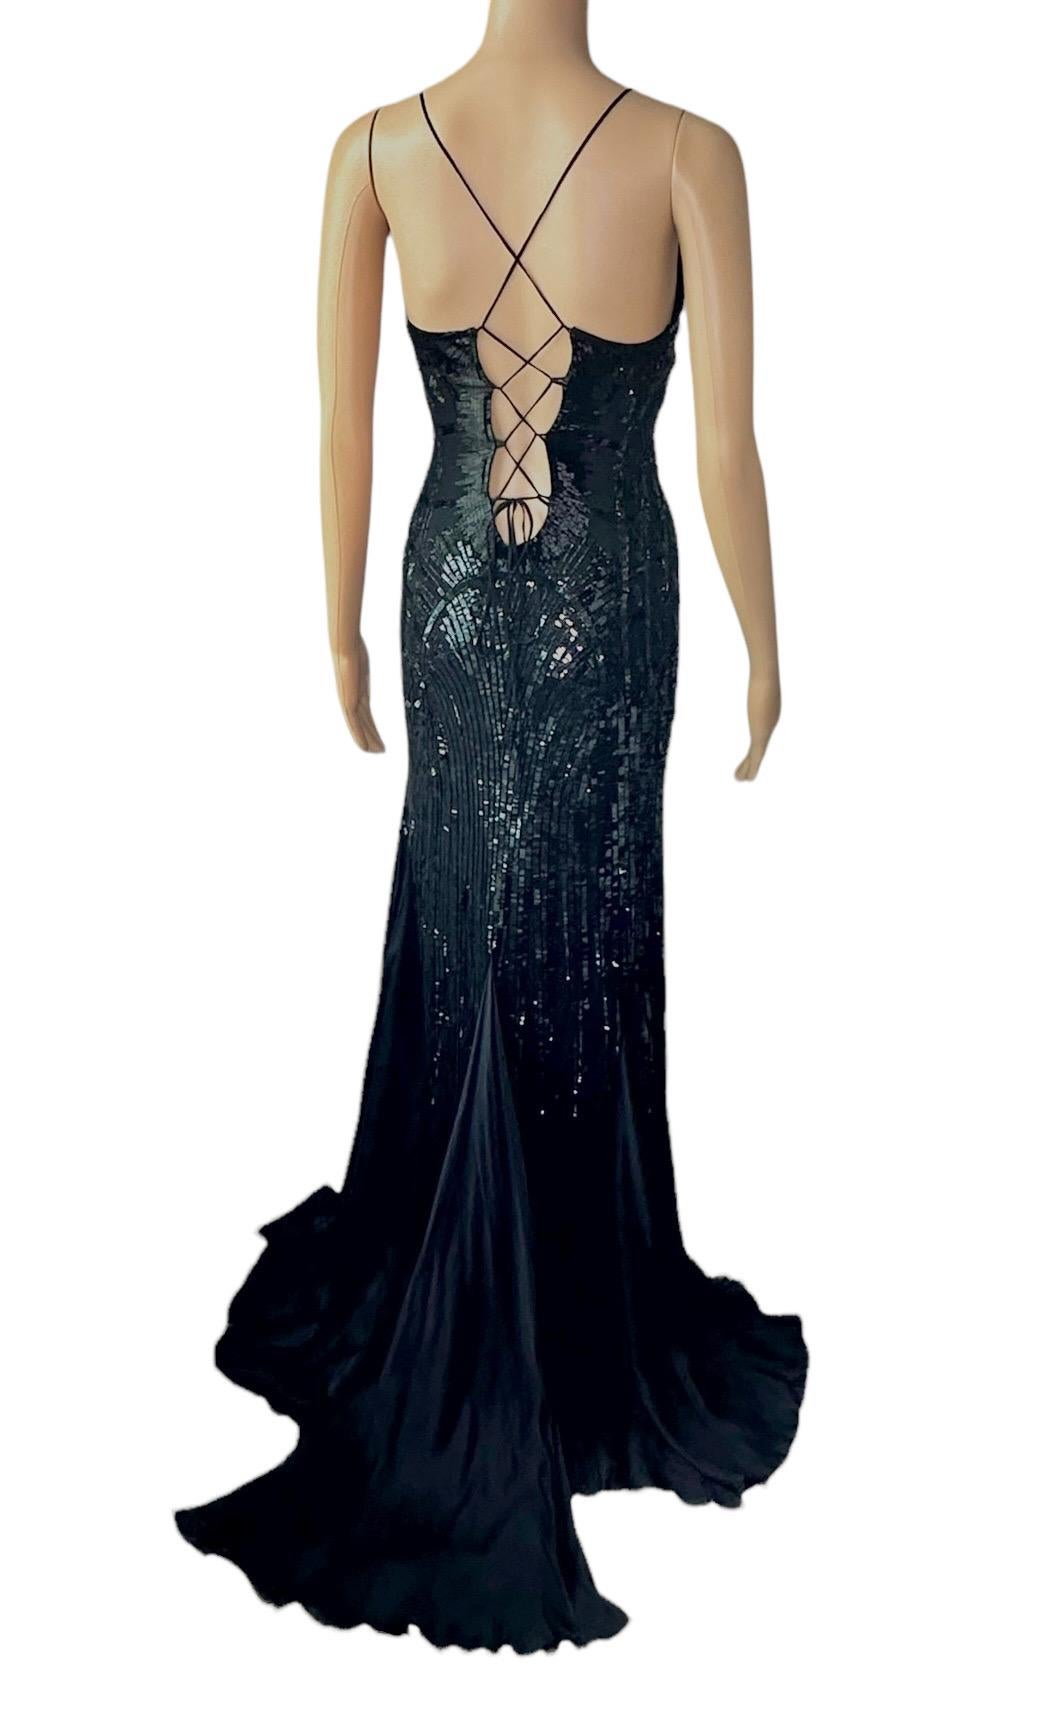 Roberto Cavalli S/S 2011 Embellished Plunged Lace Up Black Evening Dress Gown 3